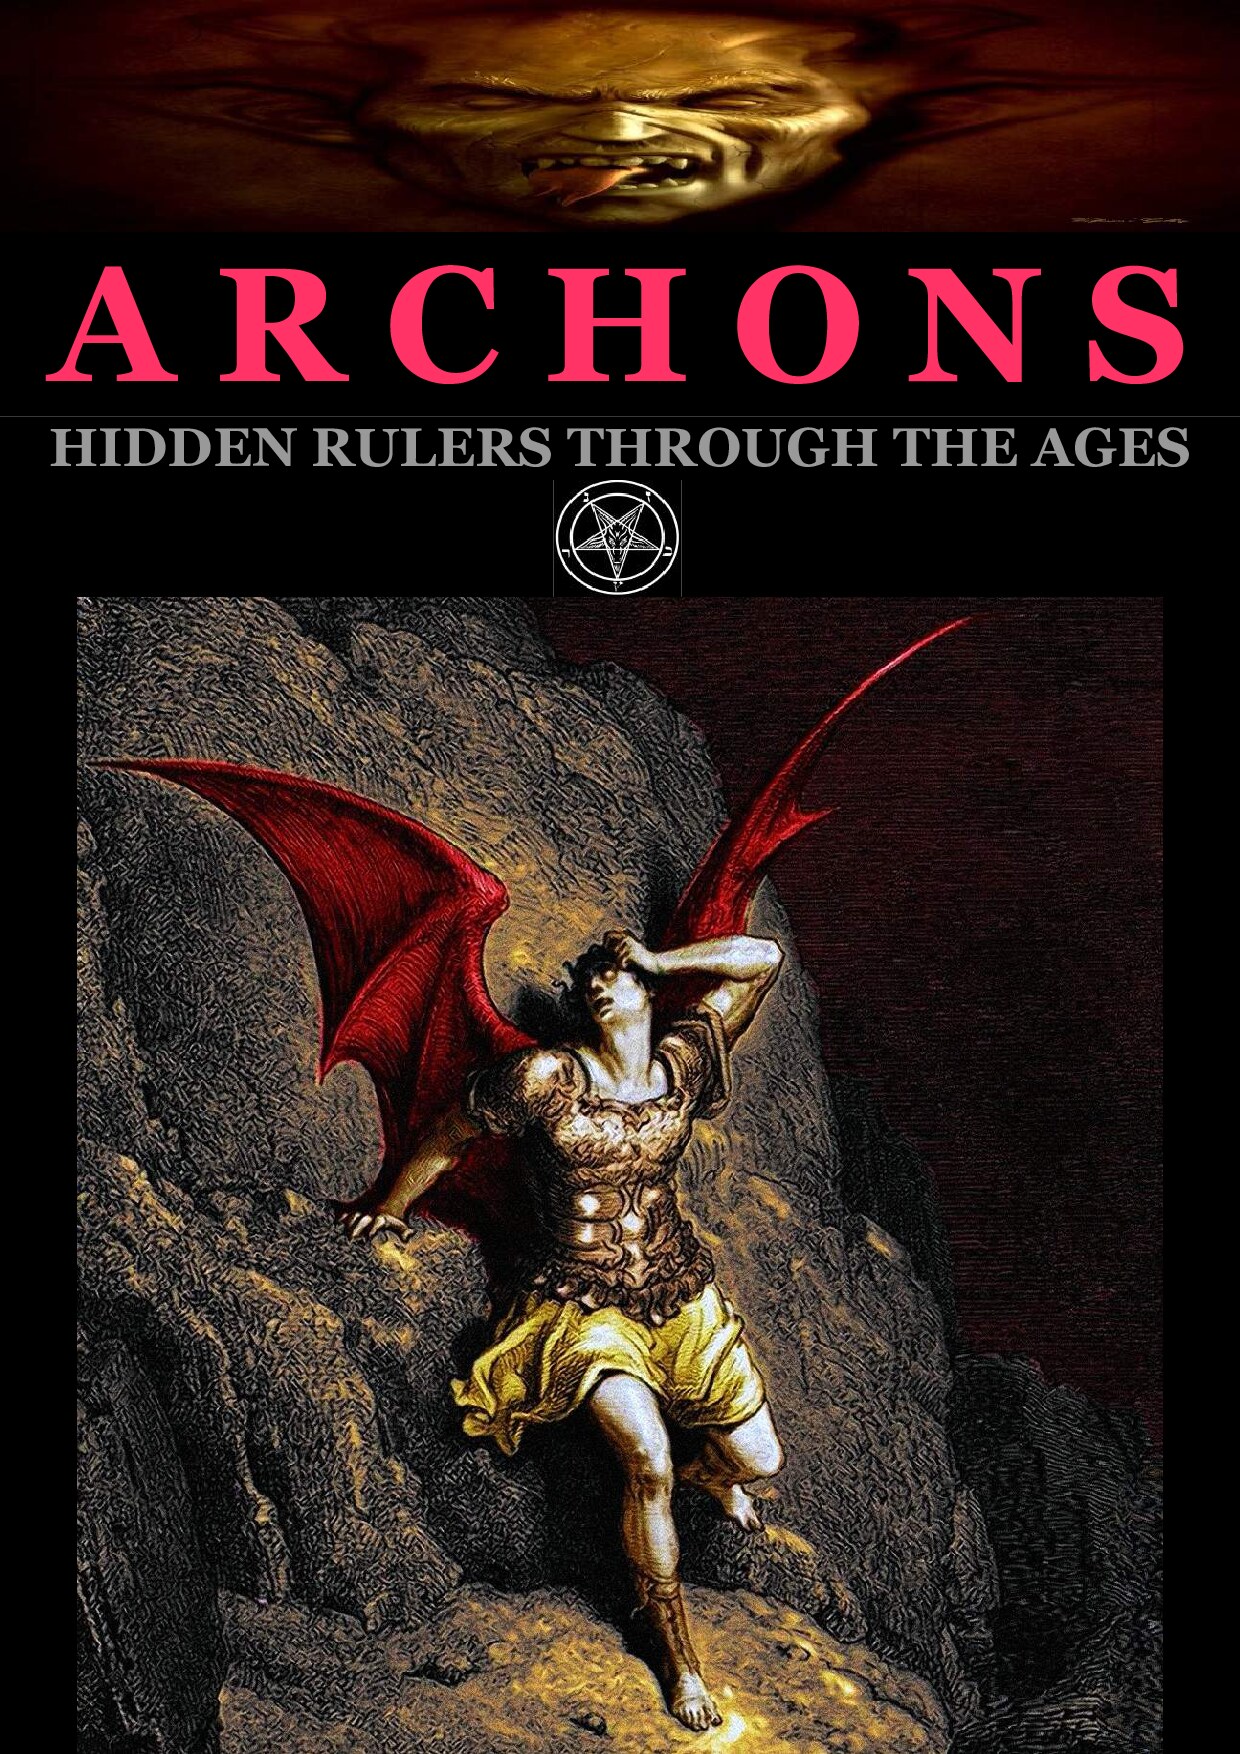 Archons: Hidden Rulers through the Ages